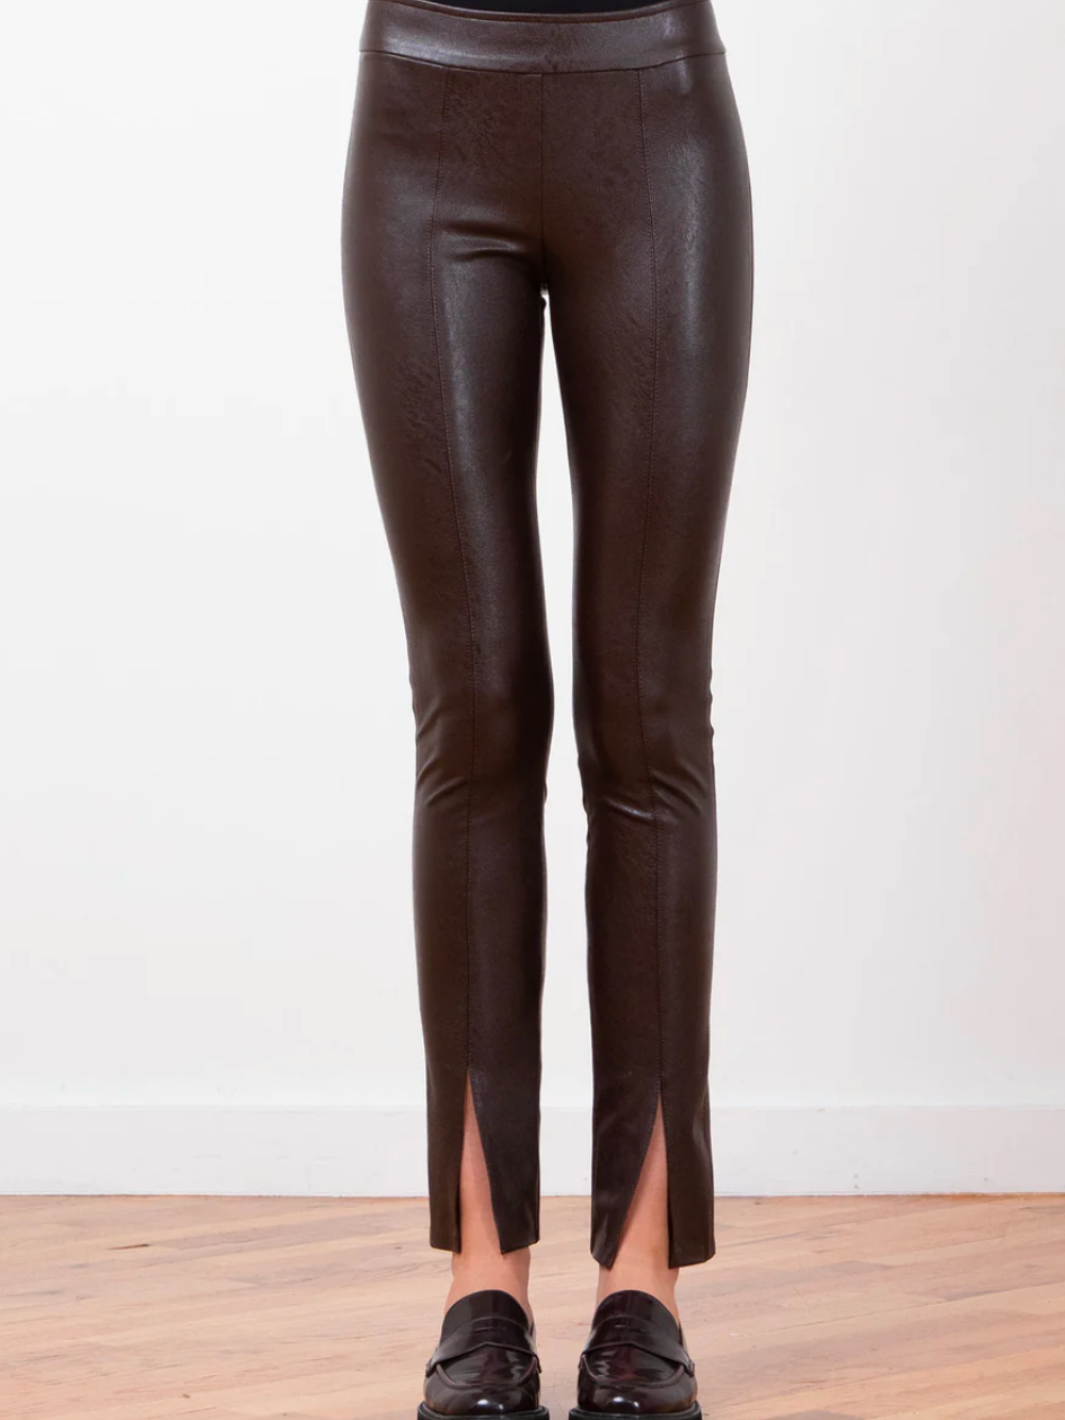 MAX FINE PLEATHER PANTS IN BROWN - Romi Boutique